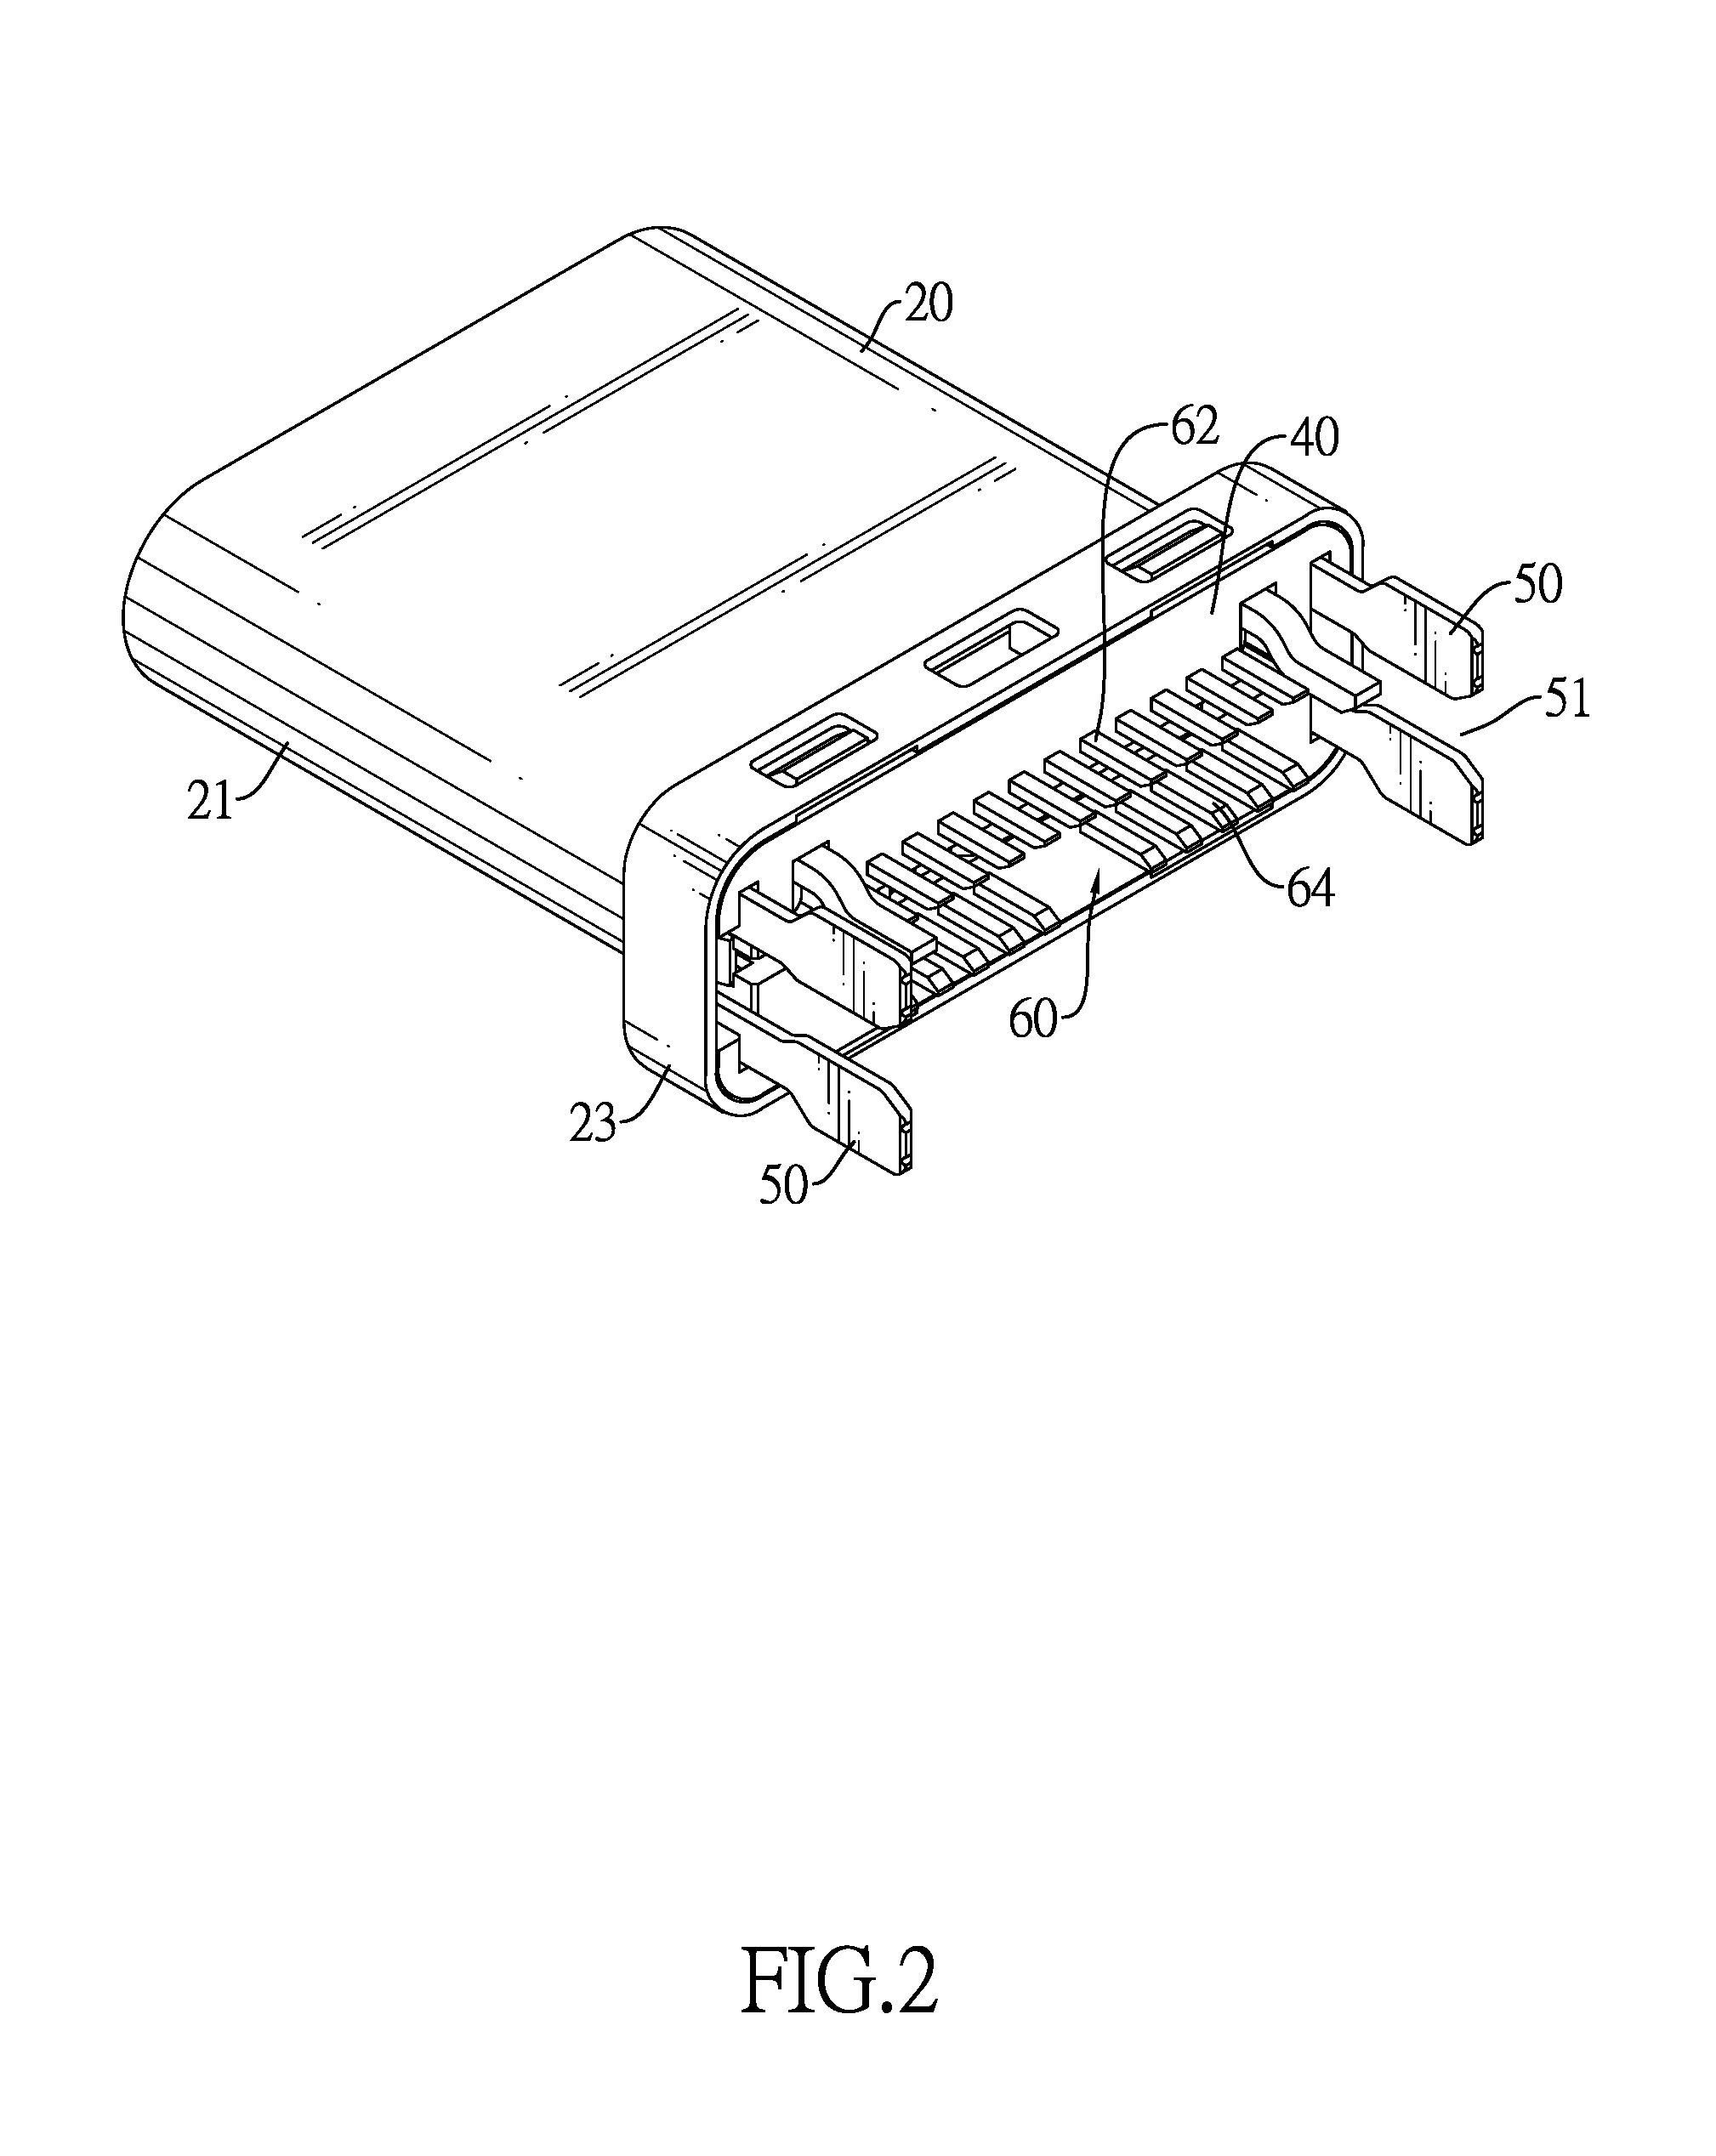 Electrical connector having holding pieces with a notch for holding a circuit board